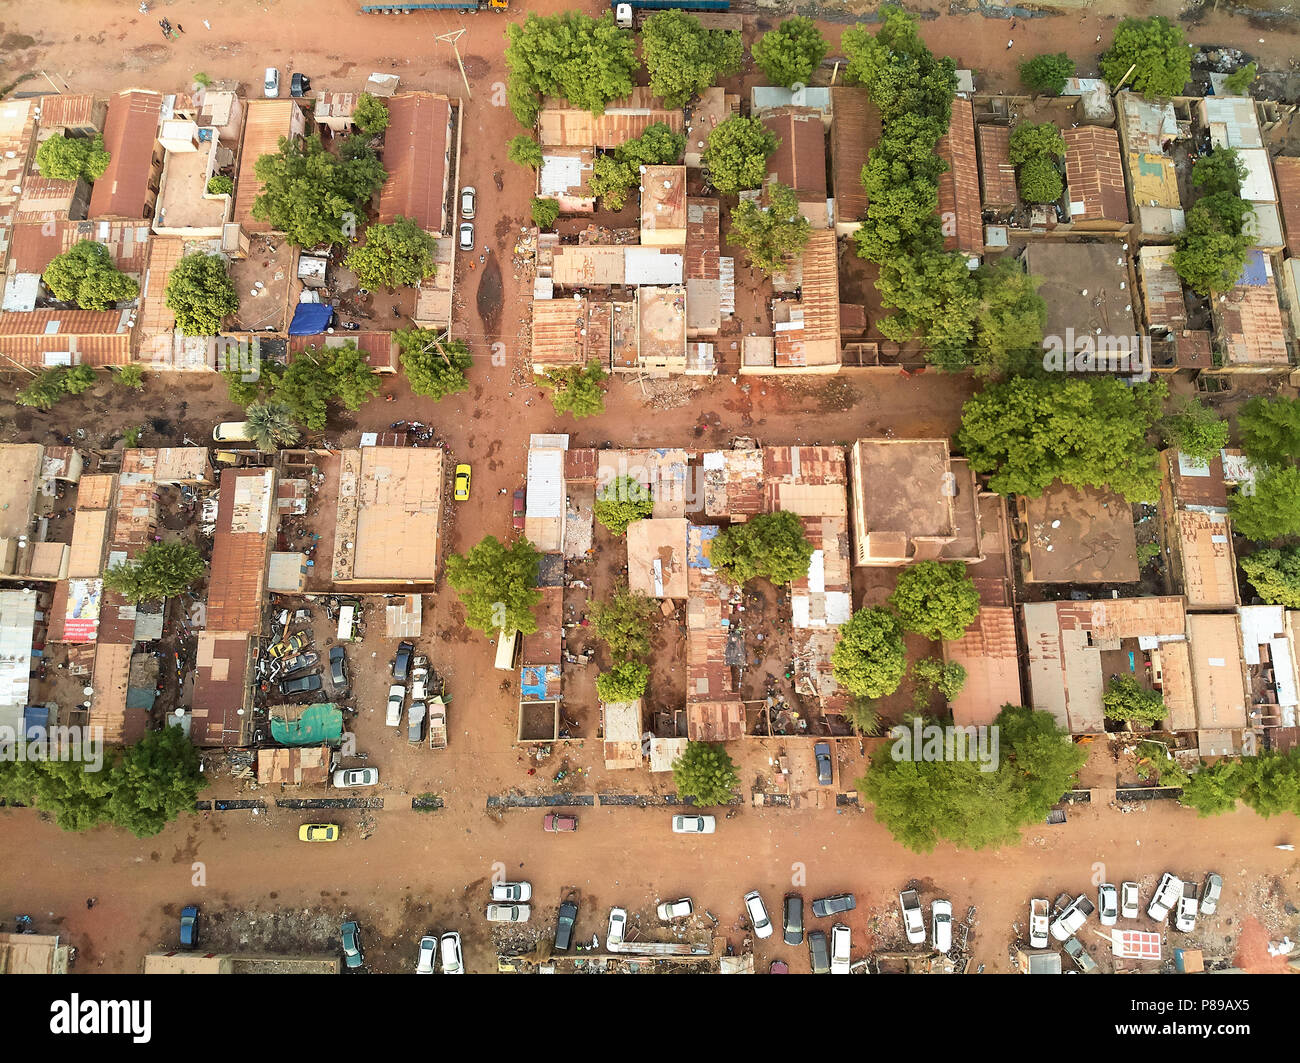 Bamako is the capital and largest city of Mali, with a population of 1.8 million. In 2006, it was estimated to be the fastest-growing city in Africa a Stock Photo